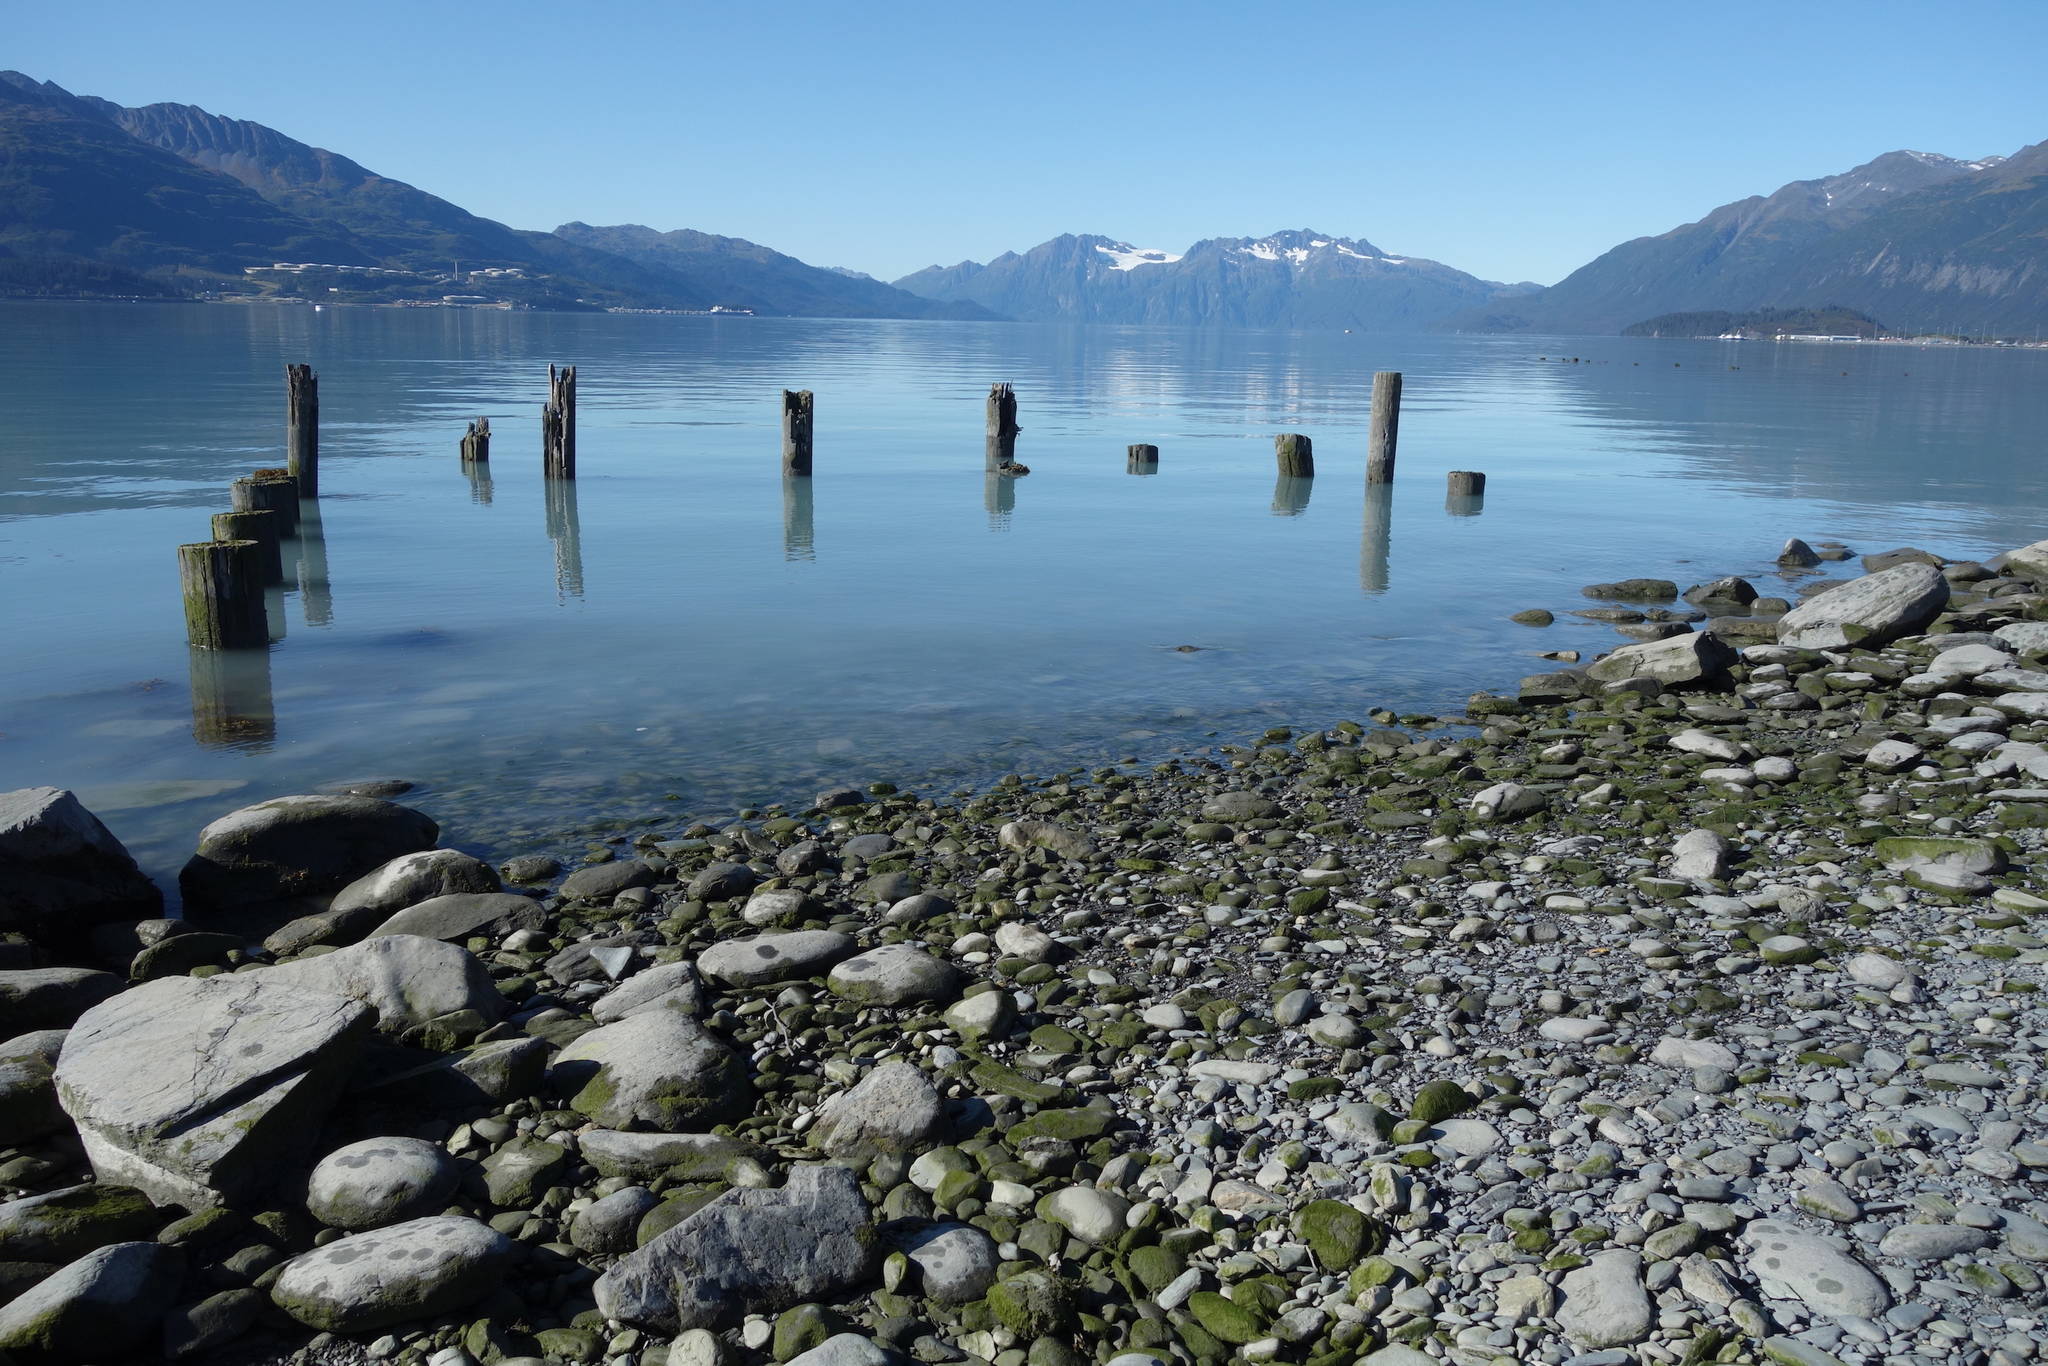 Pilings from a wharf at the former town of Valdez that waves destroyed after the Great Alaska Earthquake of March 1964. (Courtesy Photo / Ned Rozell)